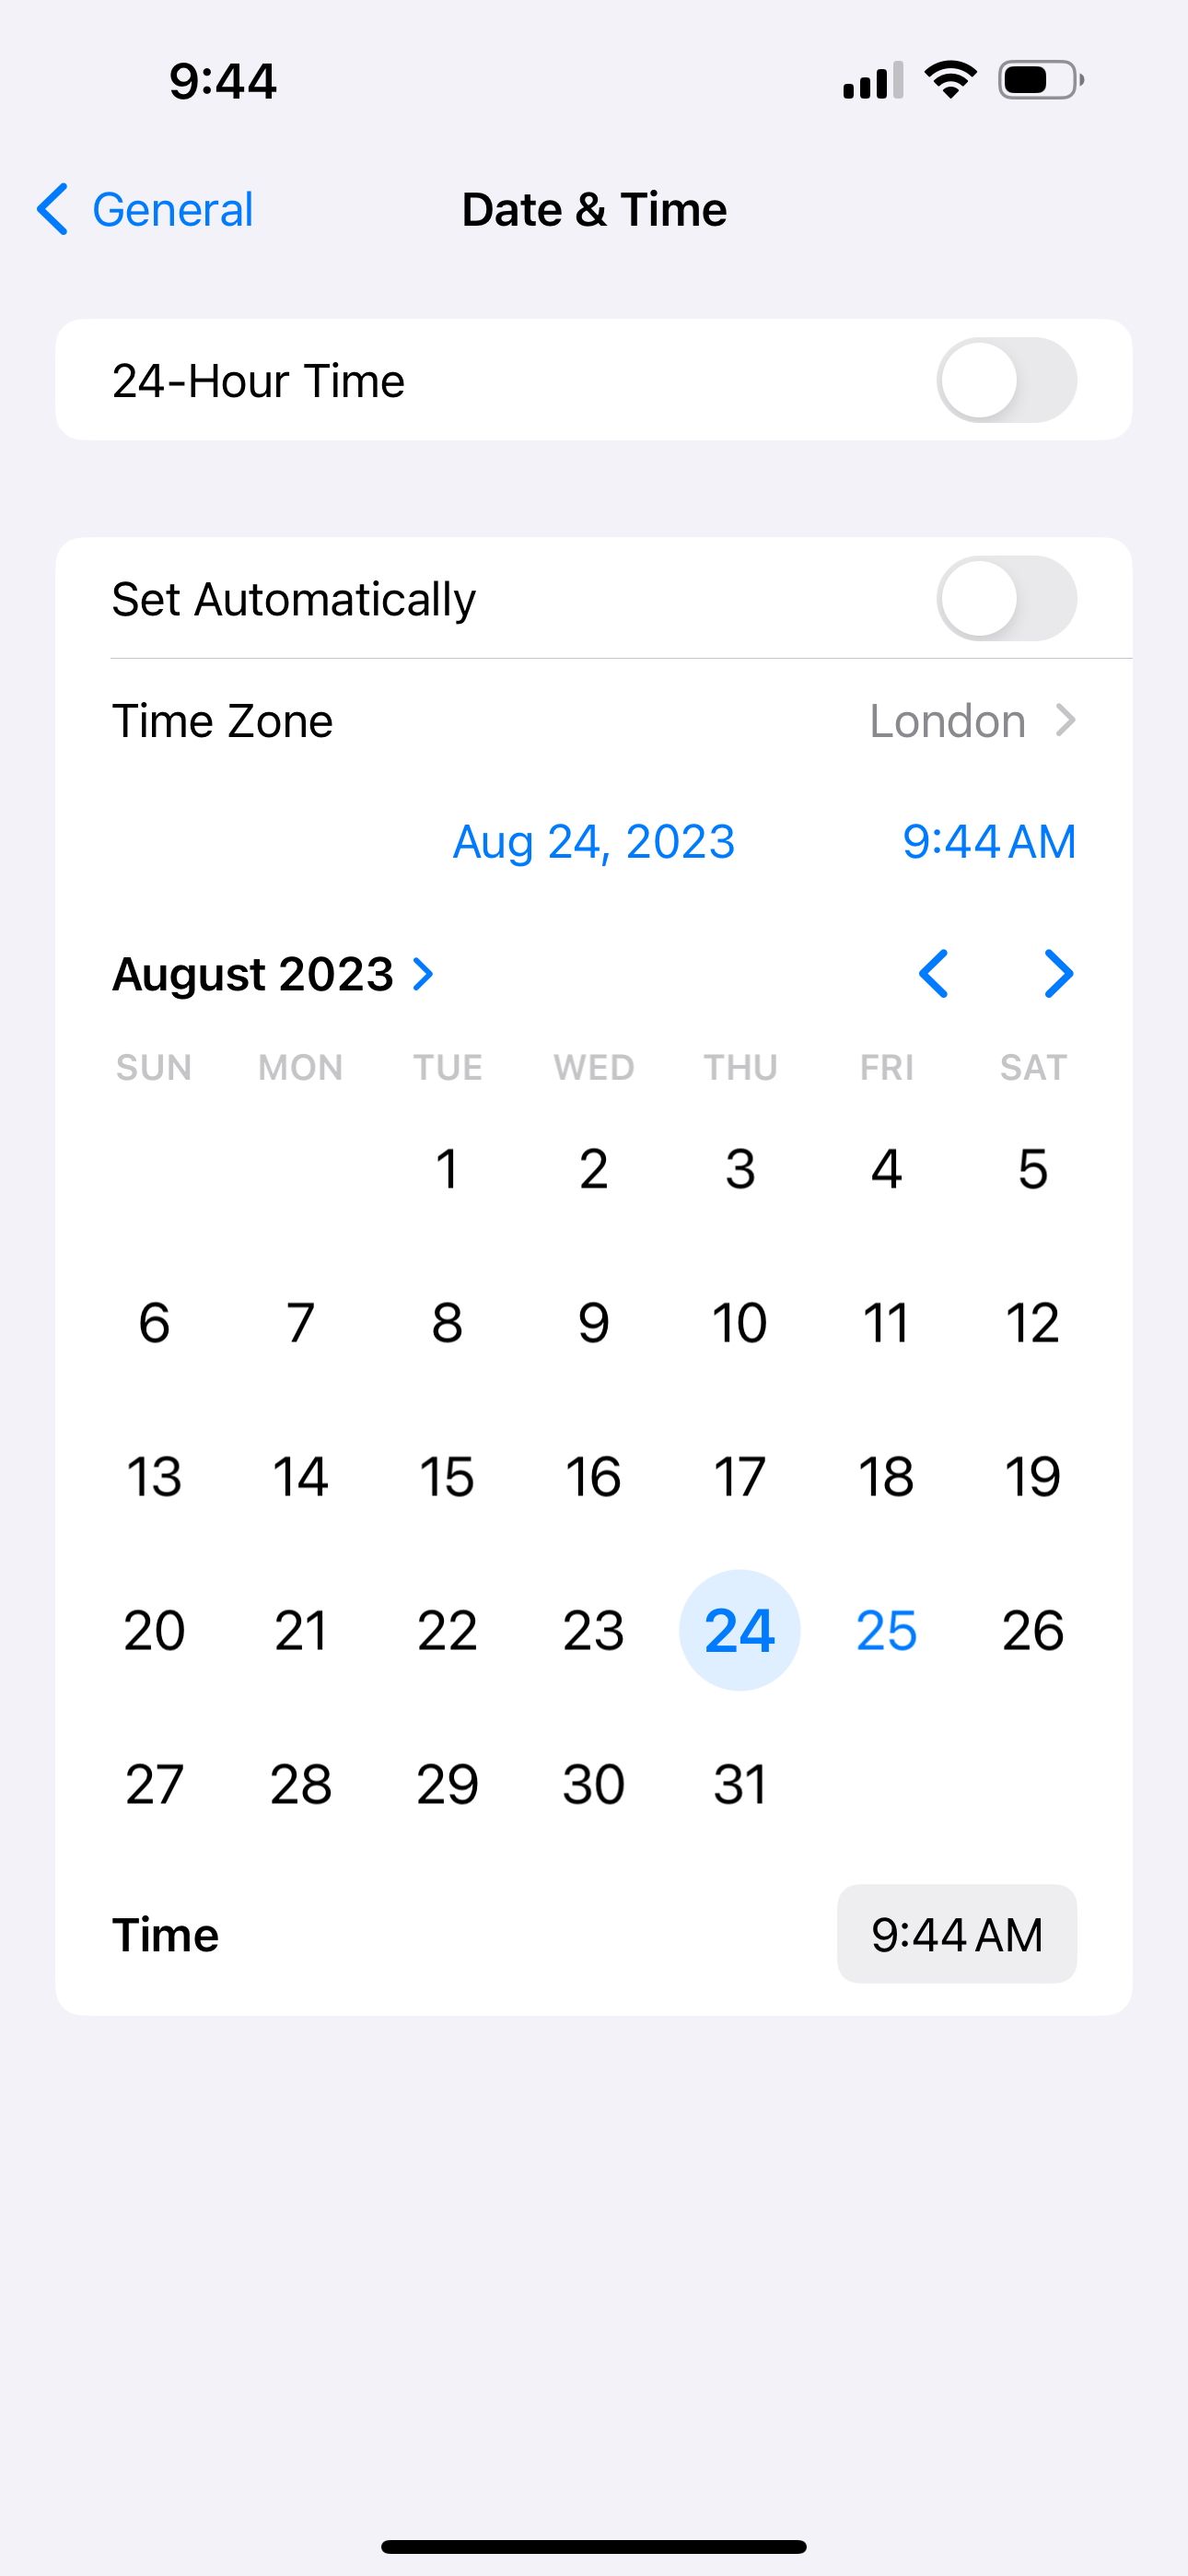 switching to a past date in iOS